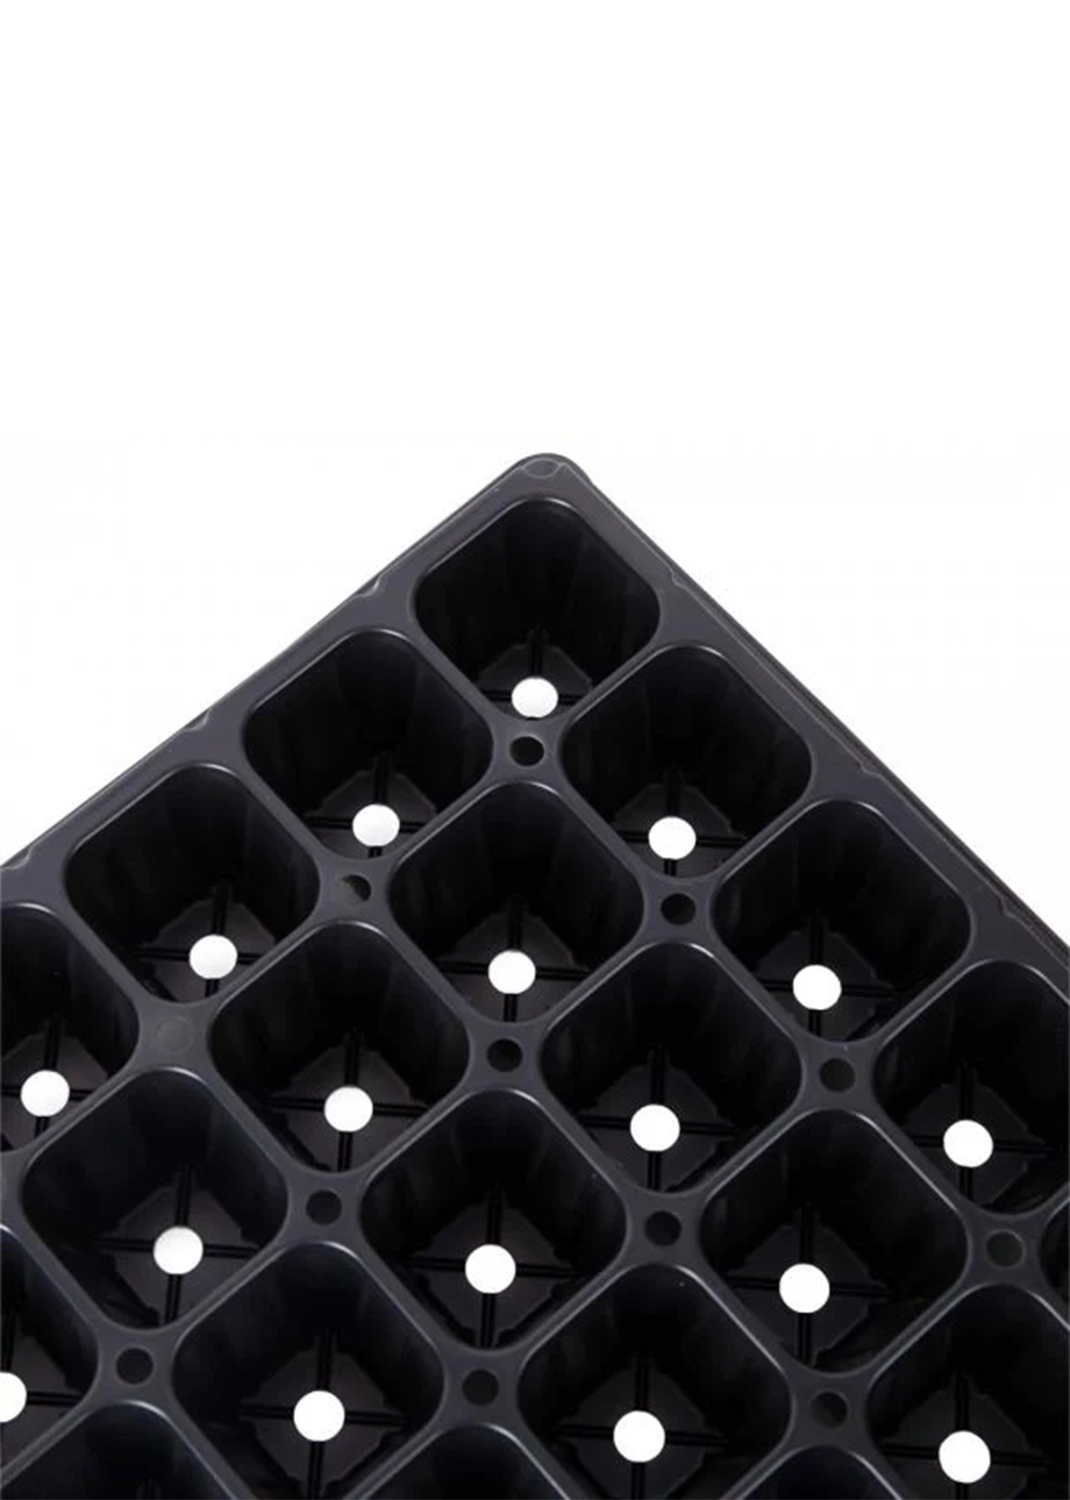 Plastic Seed Germination Tray For Hydroponic | Made in Korea